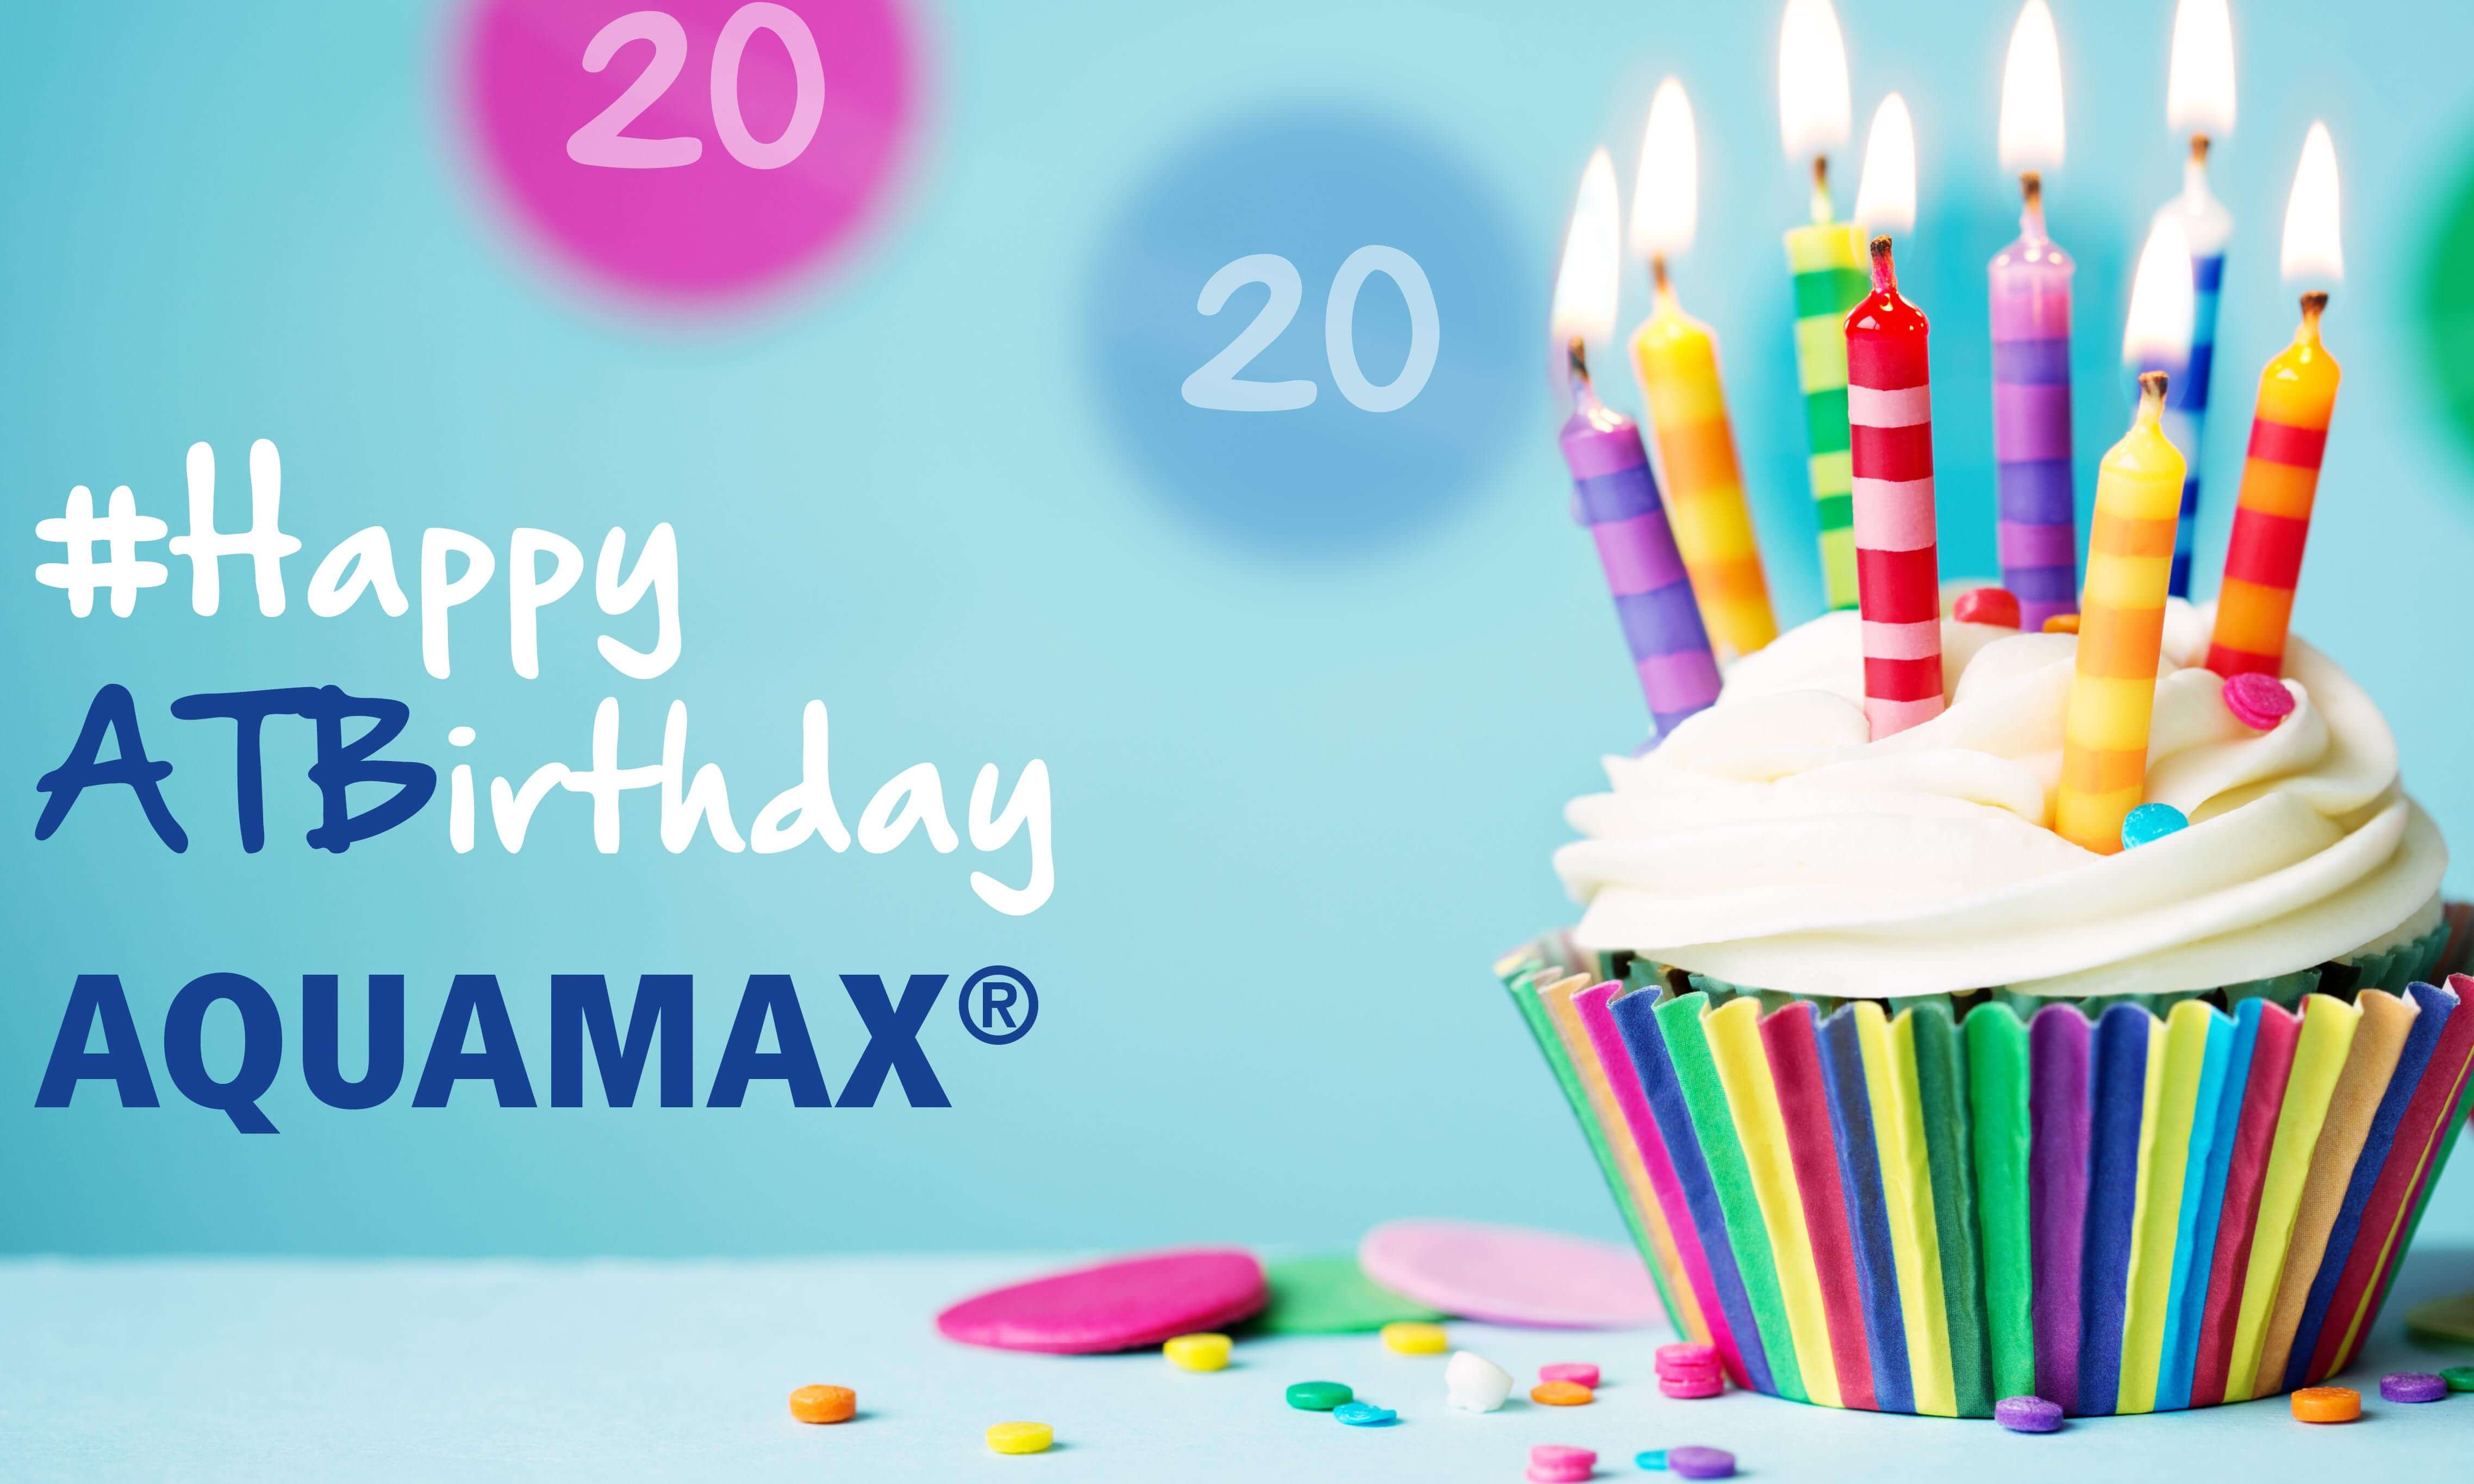 Happy ATBirthday. Our Aquamax turns 20